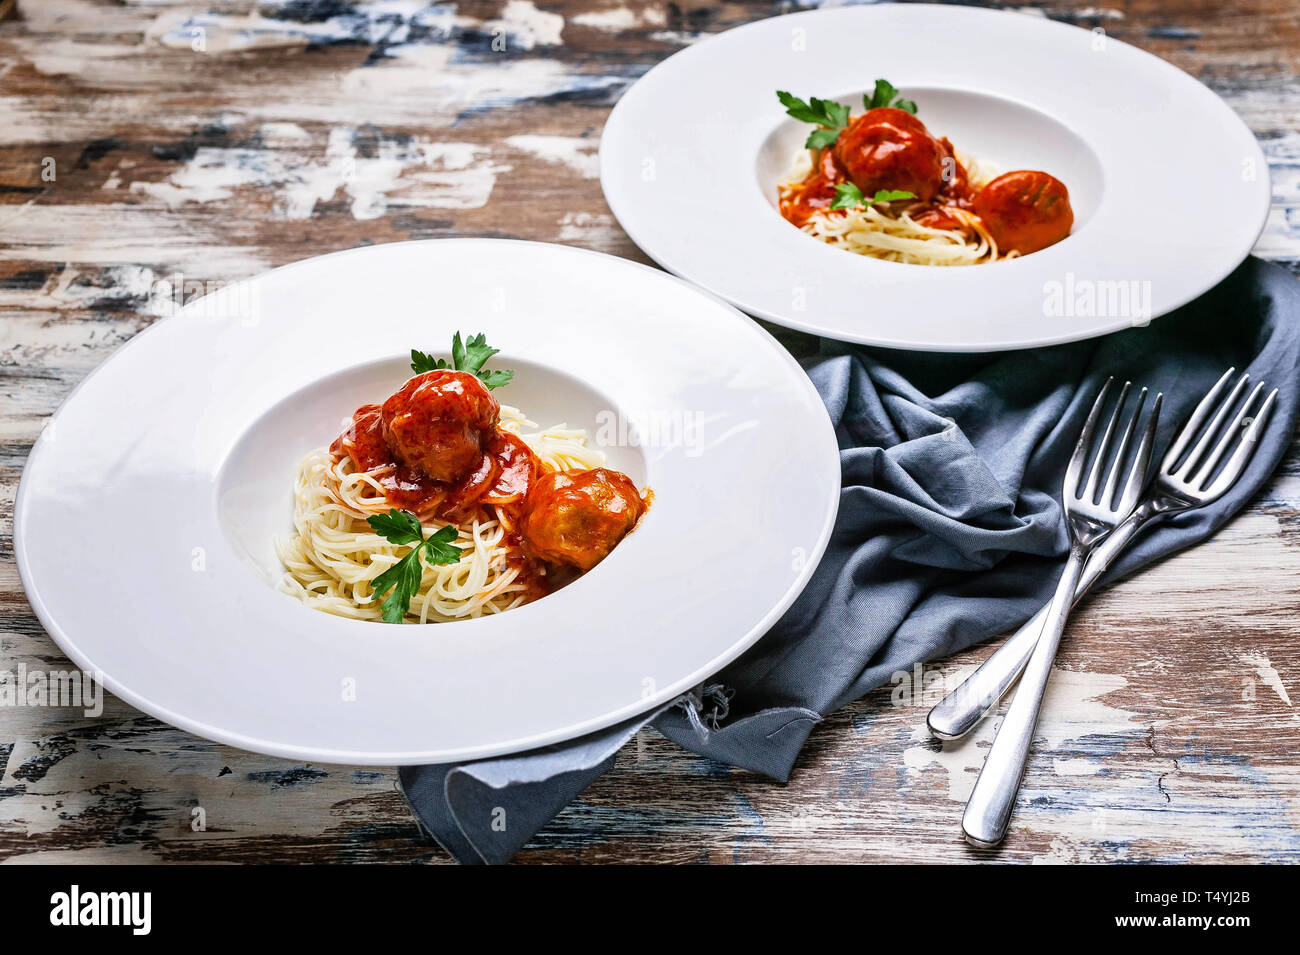 Meatballs in tomato sauce with basil and cardamom with spaghetti on large white plates Stock Photo